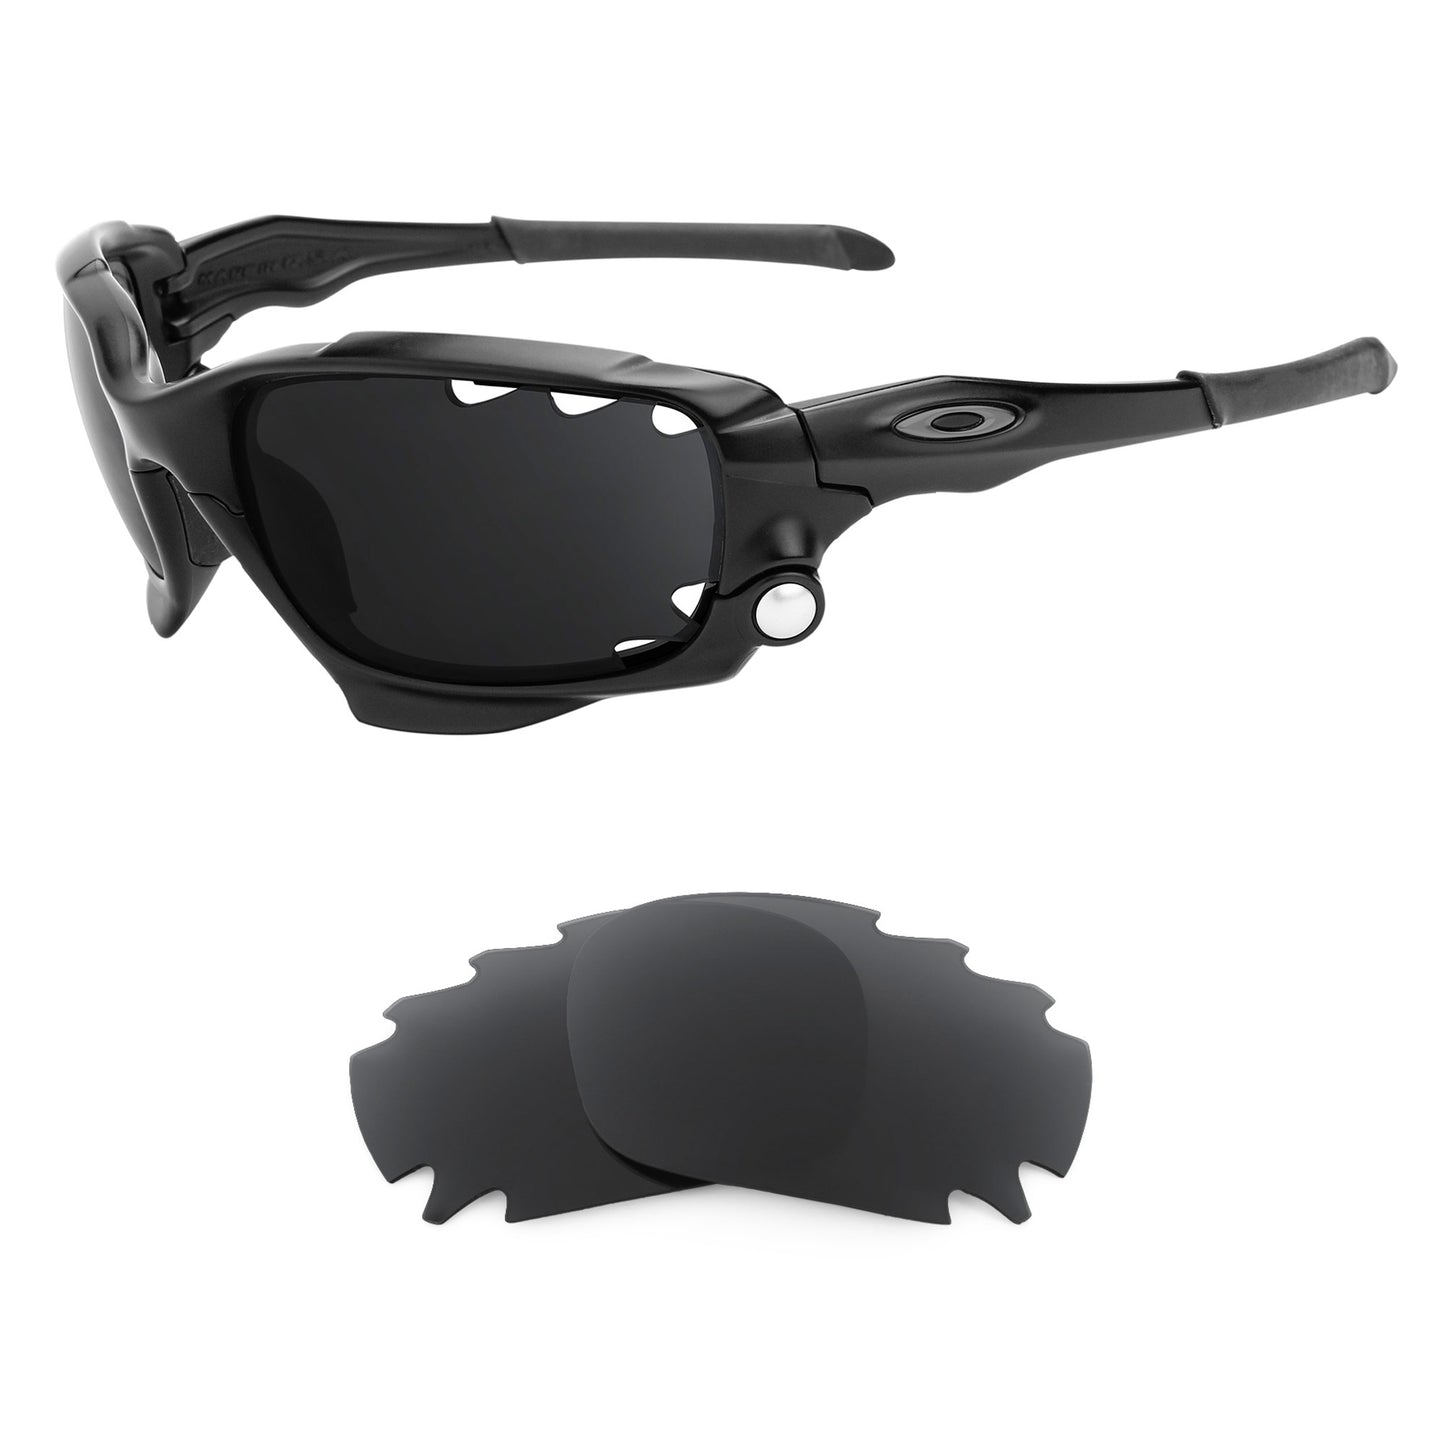 Oakley Jawbone Vented sunglasses with replacement lenses